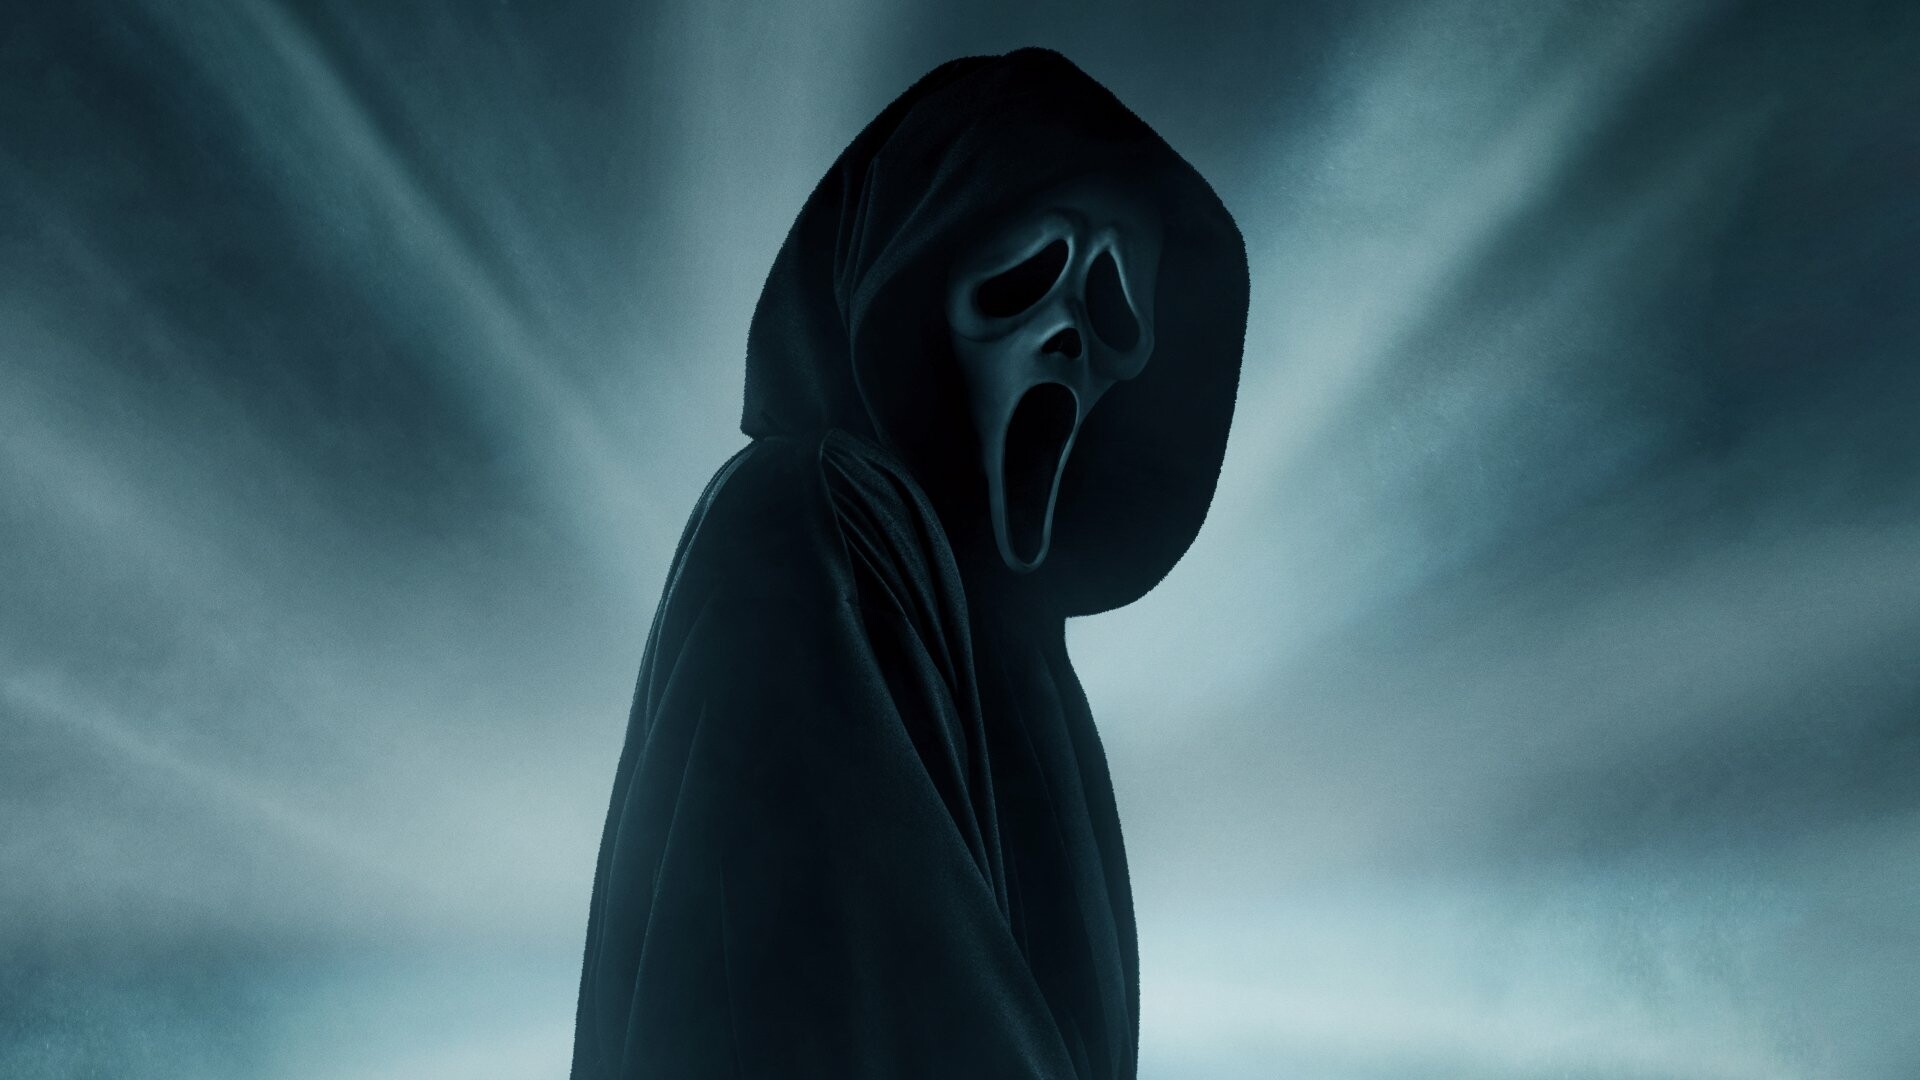 Scream (2022): The film's opening weekend gross in the United States was $30 million. 1920x1080 Full HD Background.